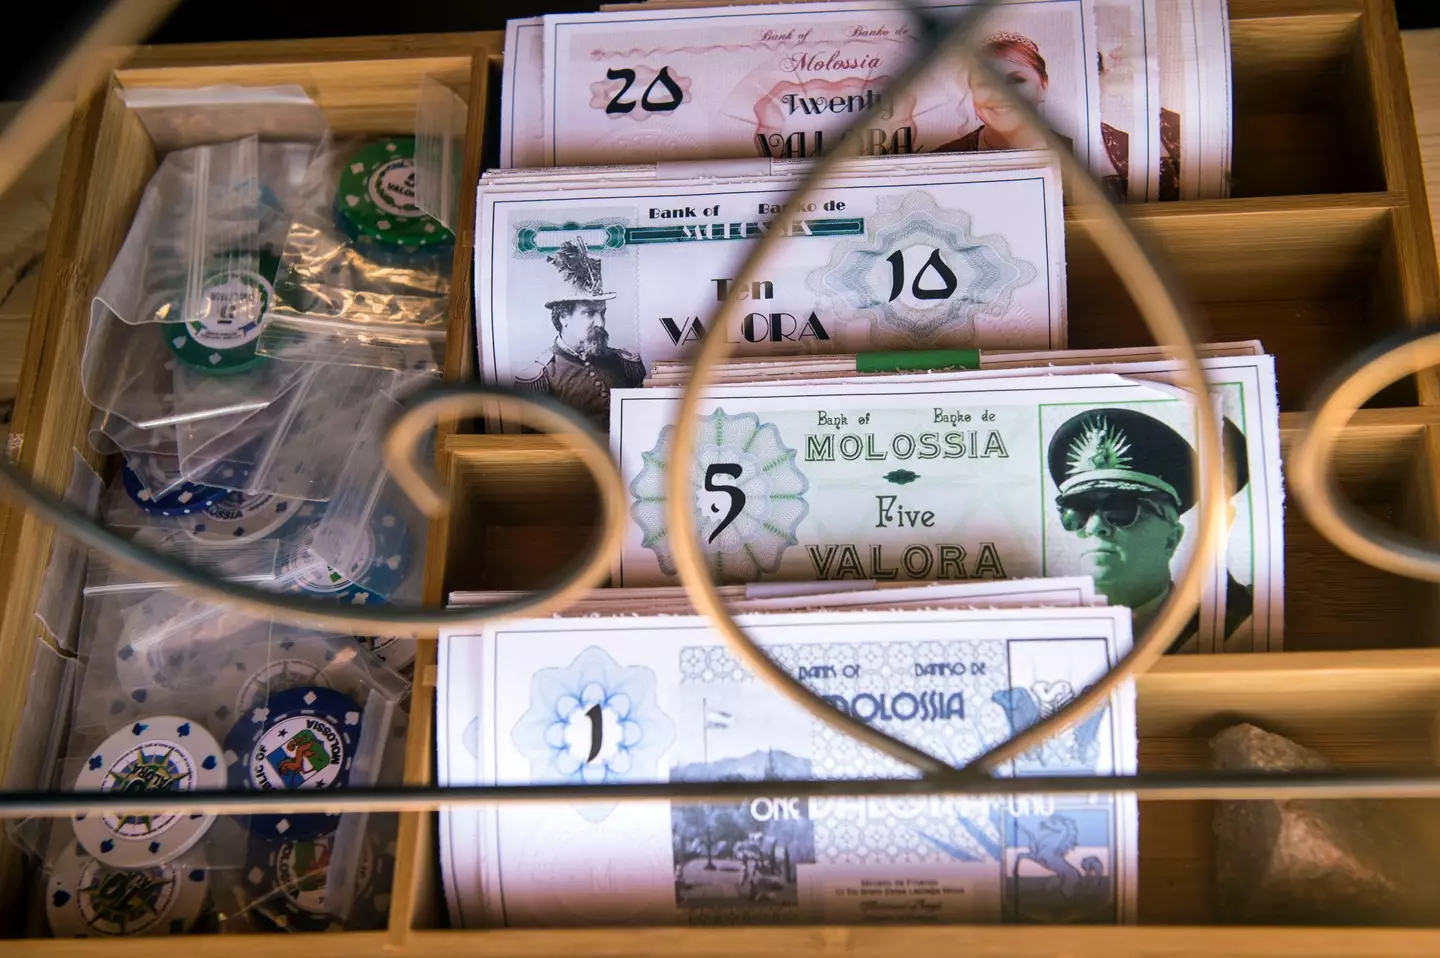 The micronation has its own currency, independent of the US.